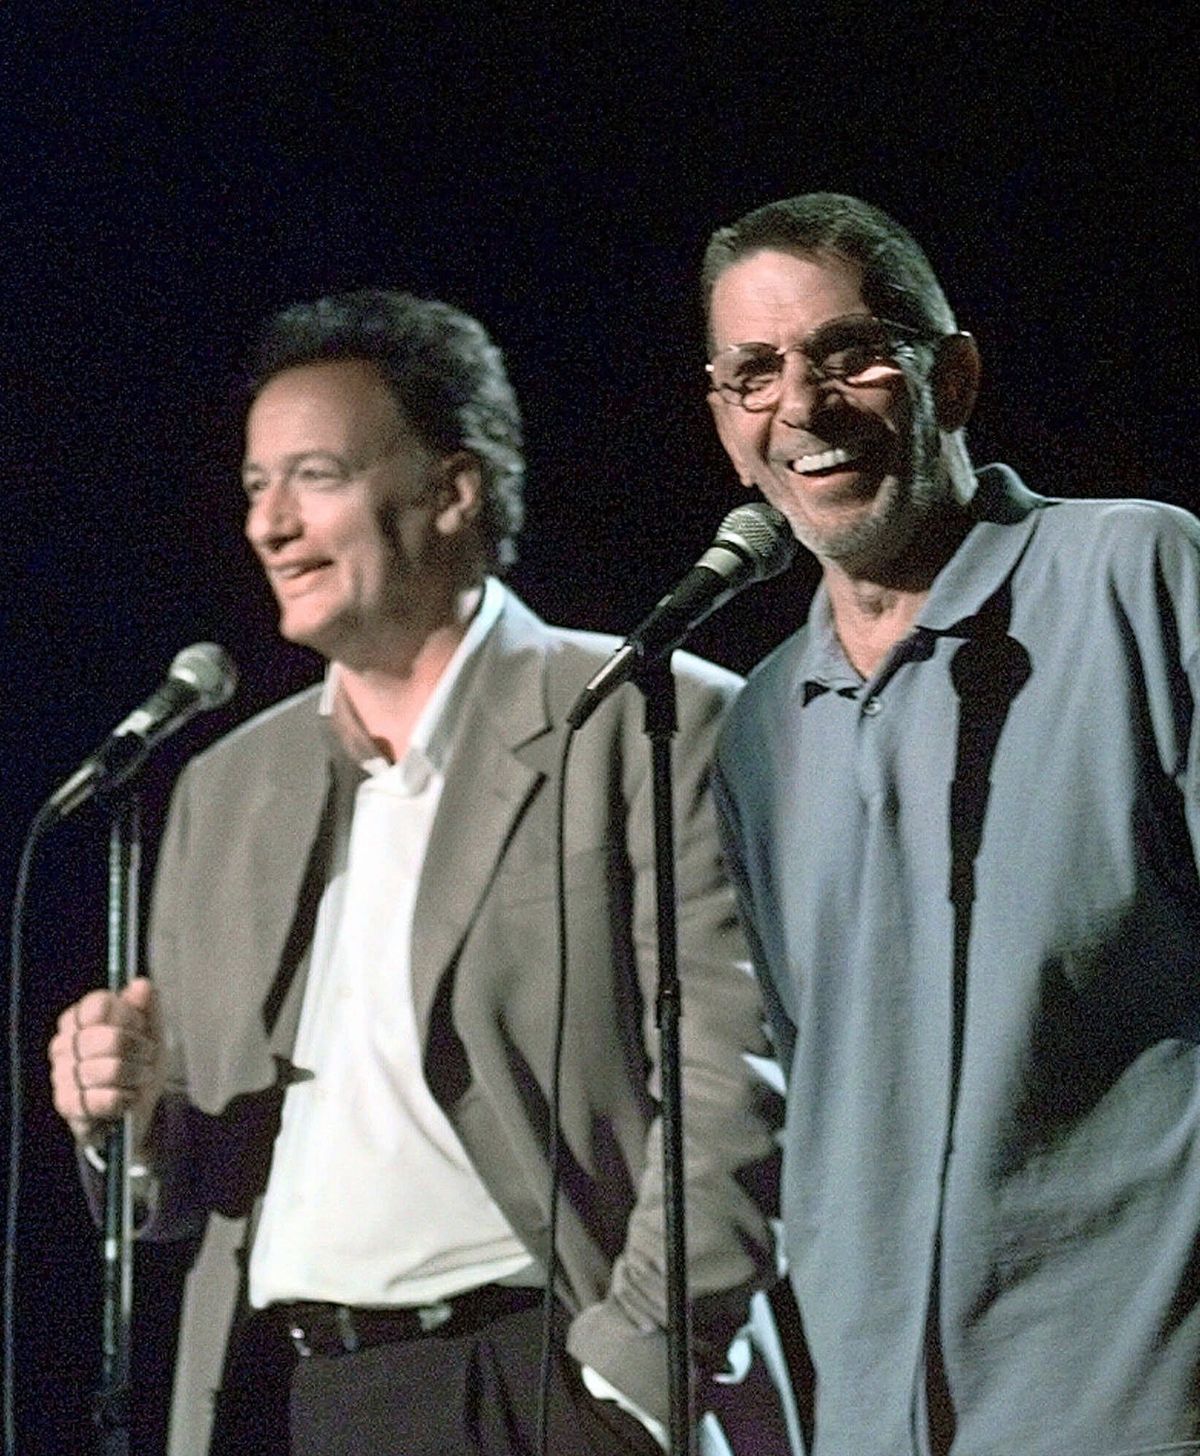 In 1999, John de Lancie, left, and Leonard Nimoy teamed to form “Alien Voices,” a company that specializes in audio recording of science-fiction works. At left, de Lancie as the omnipotent Q in “Star Trek: Voyager.” (Associated Press)